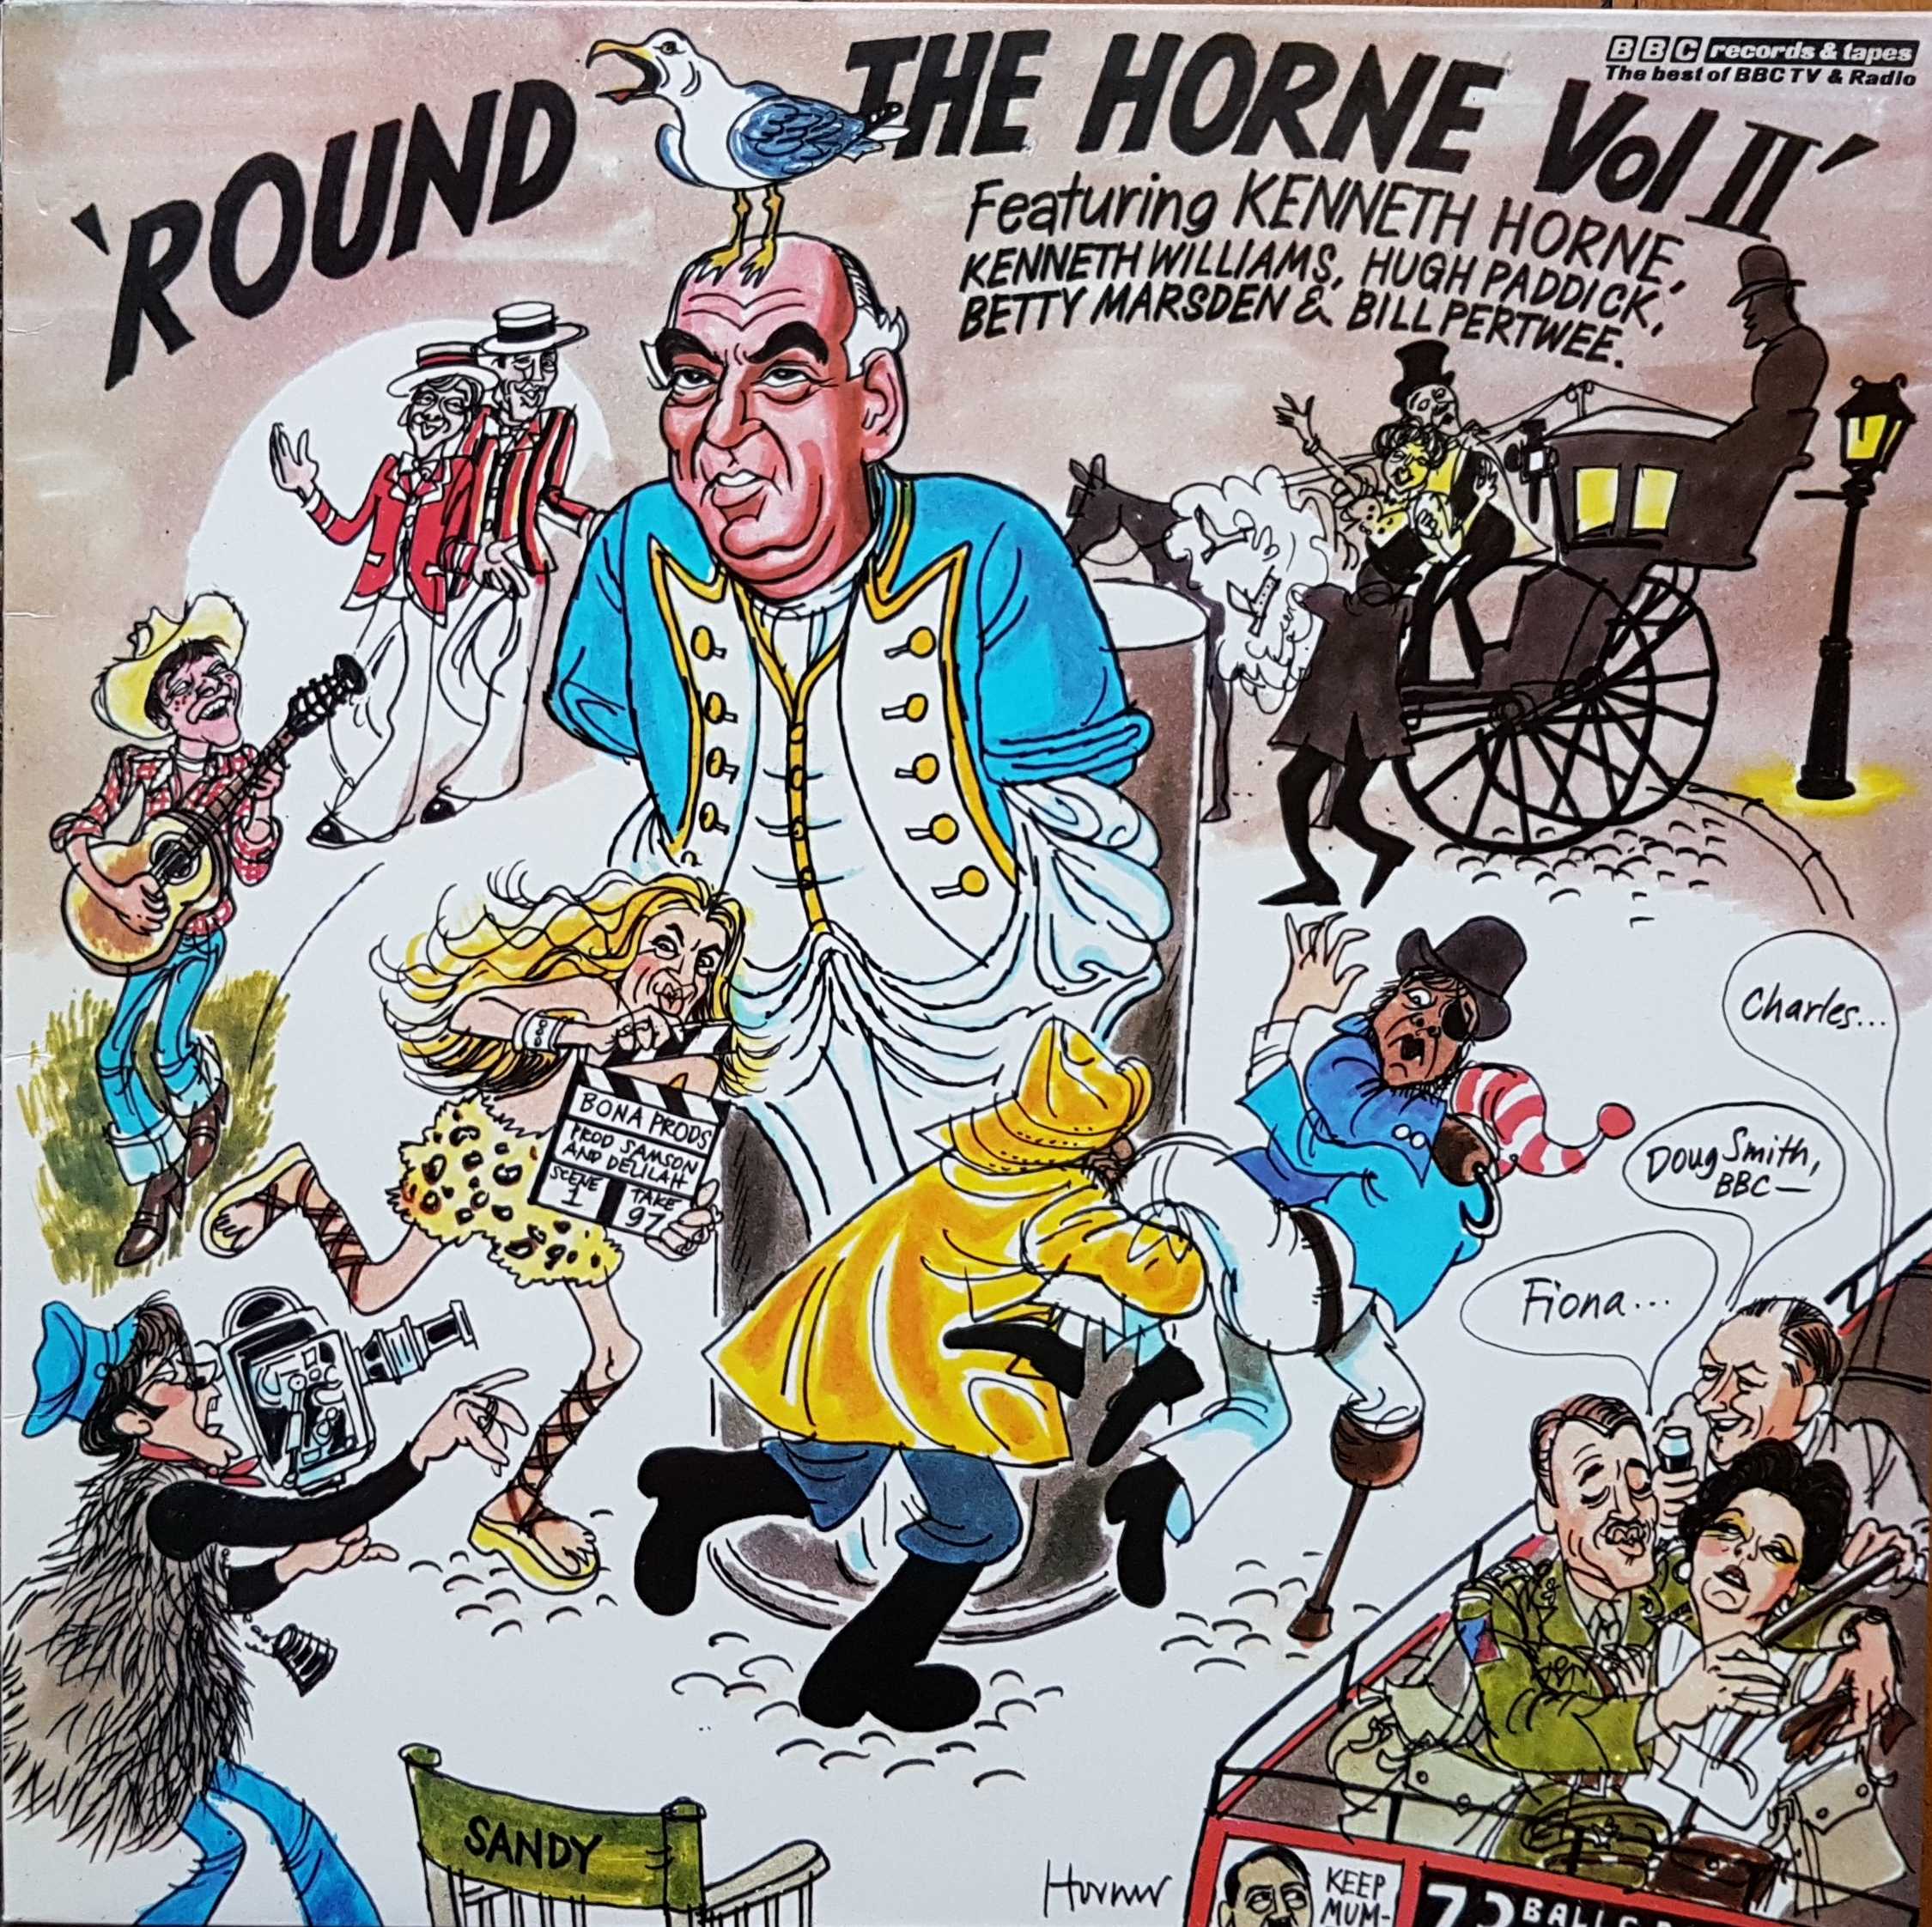 Picture of REH 240 Round the Horne volume 2, more of the best by artist Barry Took / Marty Feldman from the BBC albums - Records and Tapes library